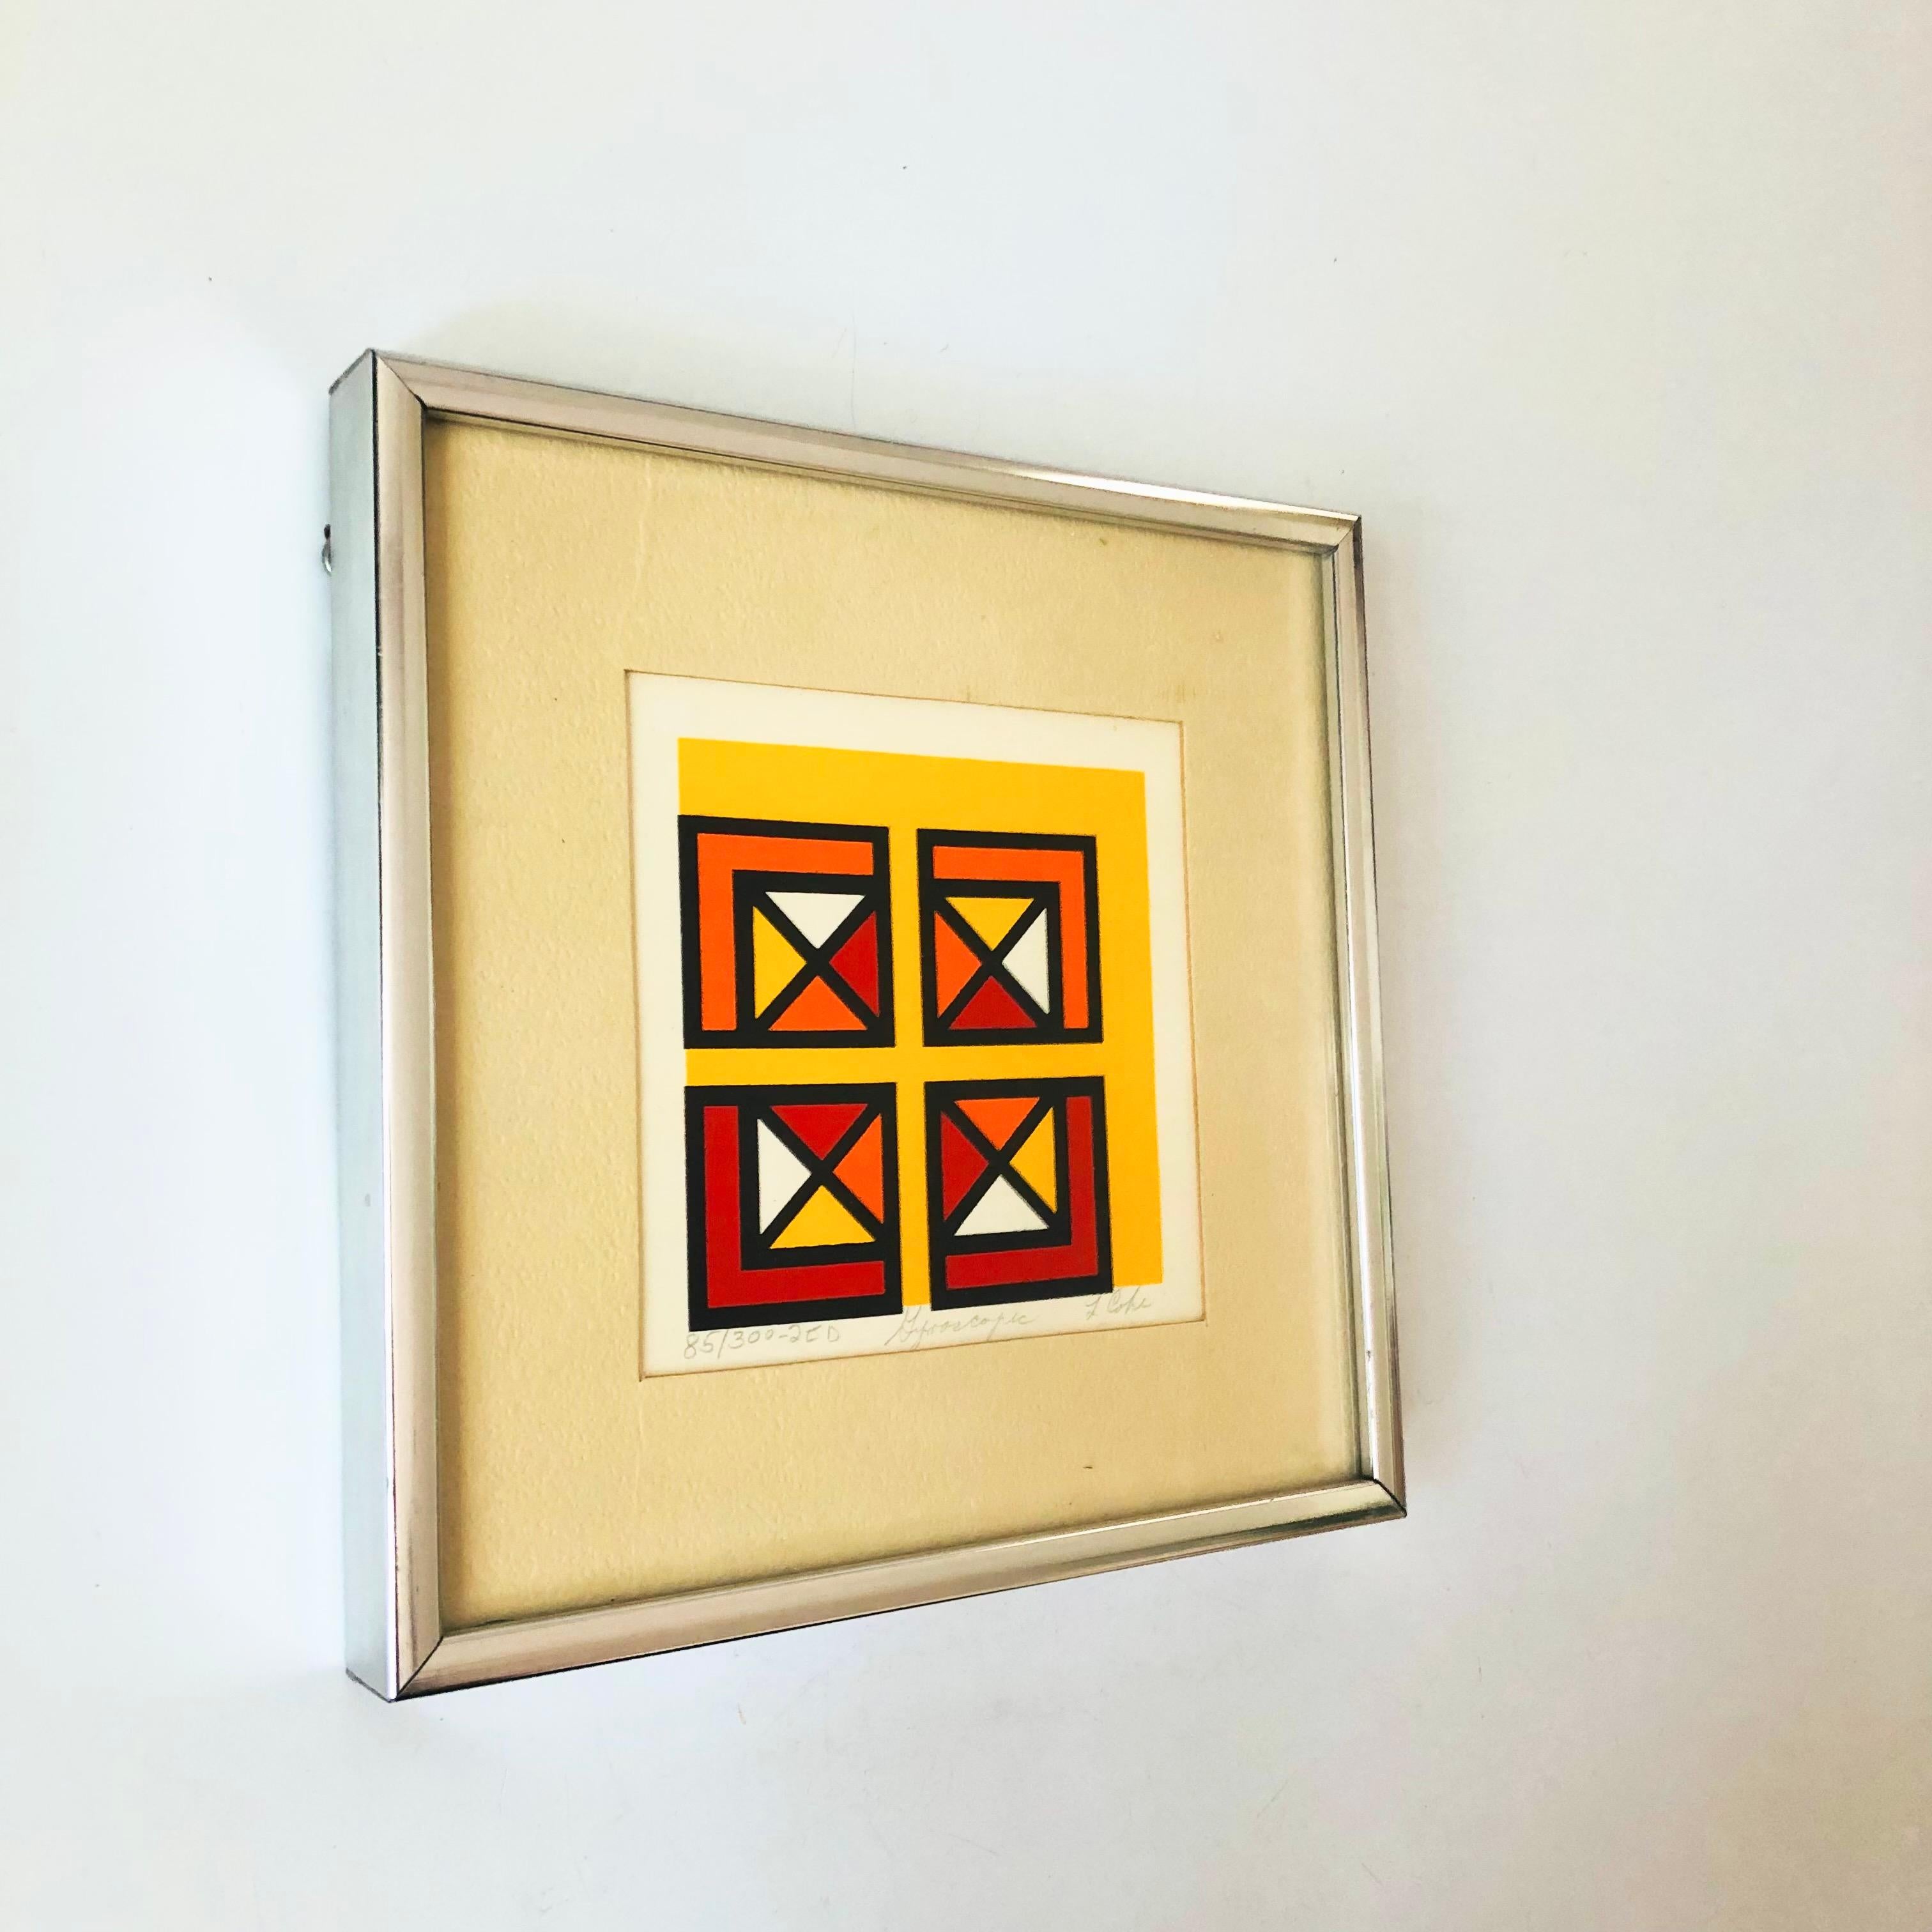 A mid century geometric abstract serigraph by artist L Cohe. Estimated to have been produced  circa 1970. Titled 